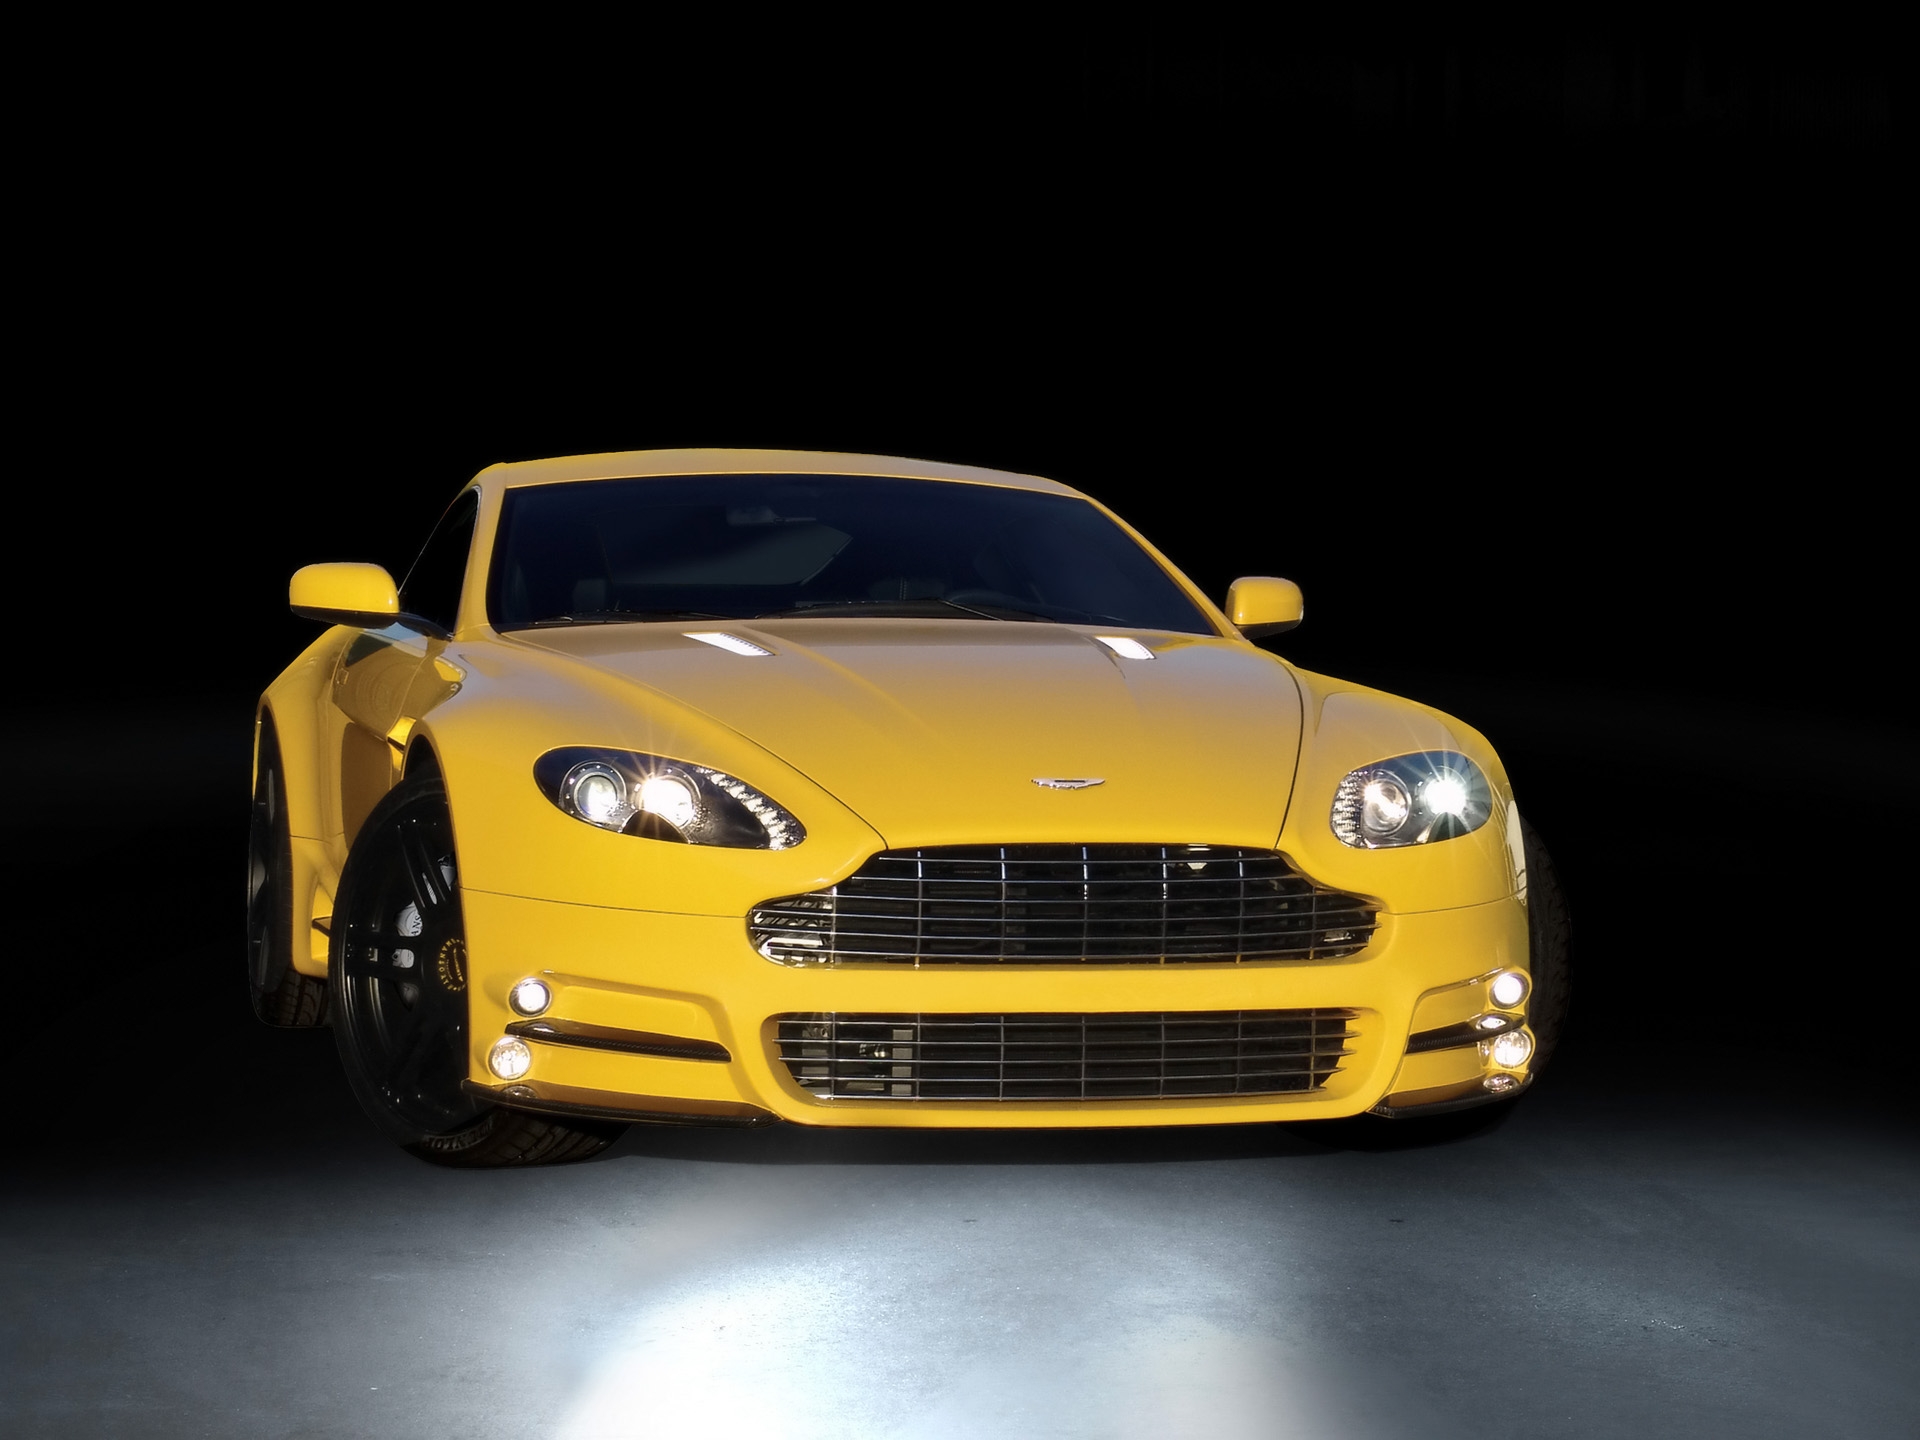 sports, aston martin, cars, yellow, front view, style, v8, vantage, mansory